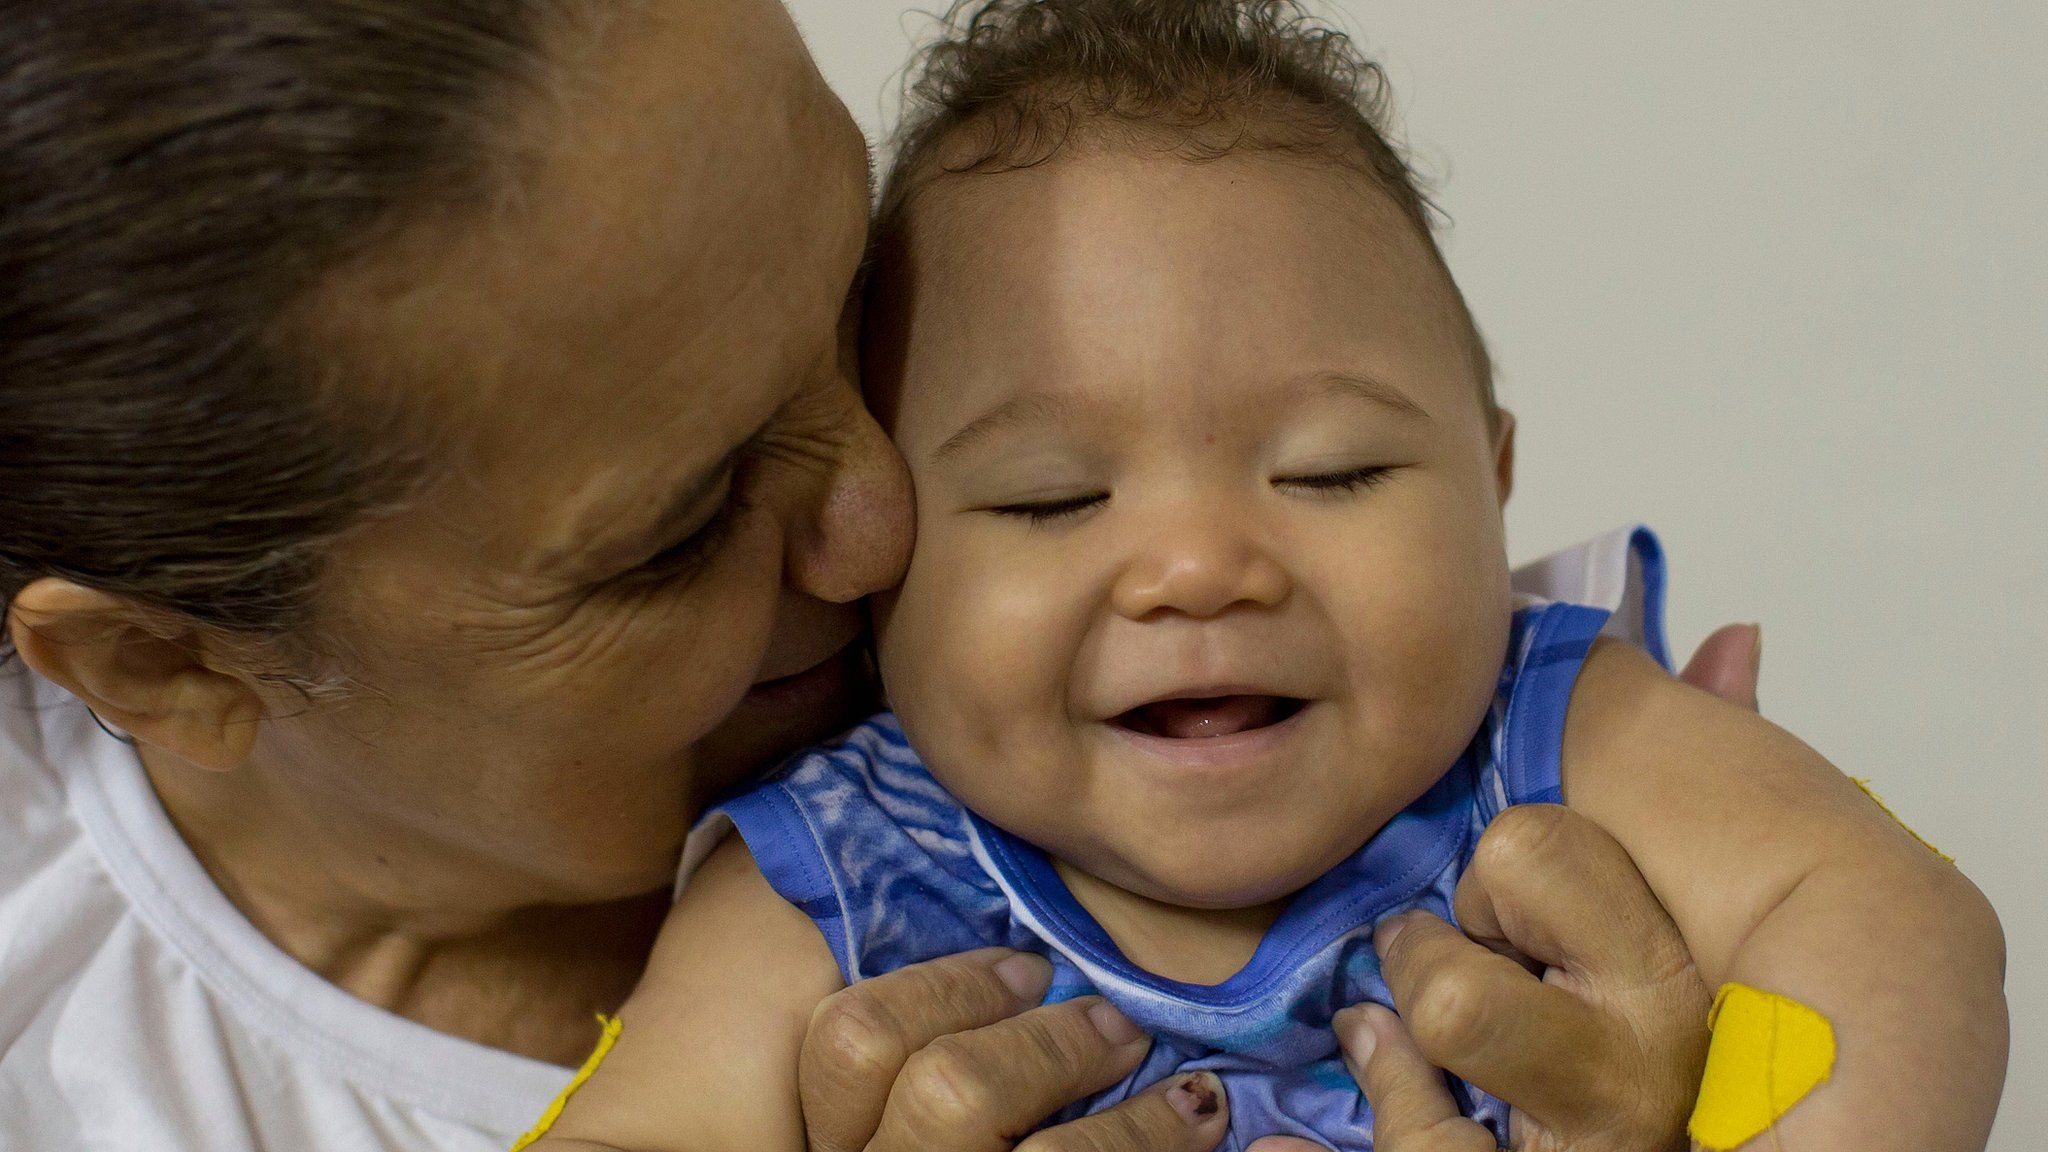 Caio Julio Vasconcelos, who was born with microcephaly, is kissed by a therapist in Joao Pessoa, Brazil, on 25 February 2016